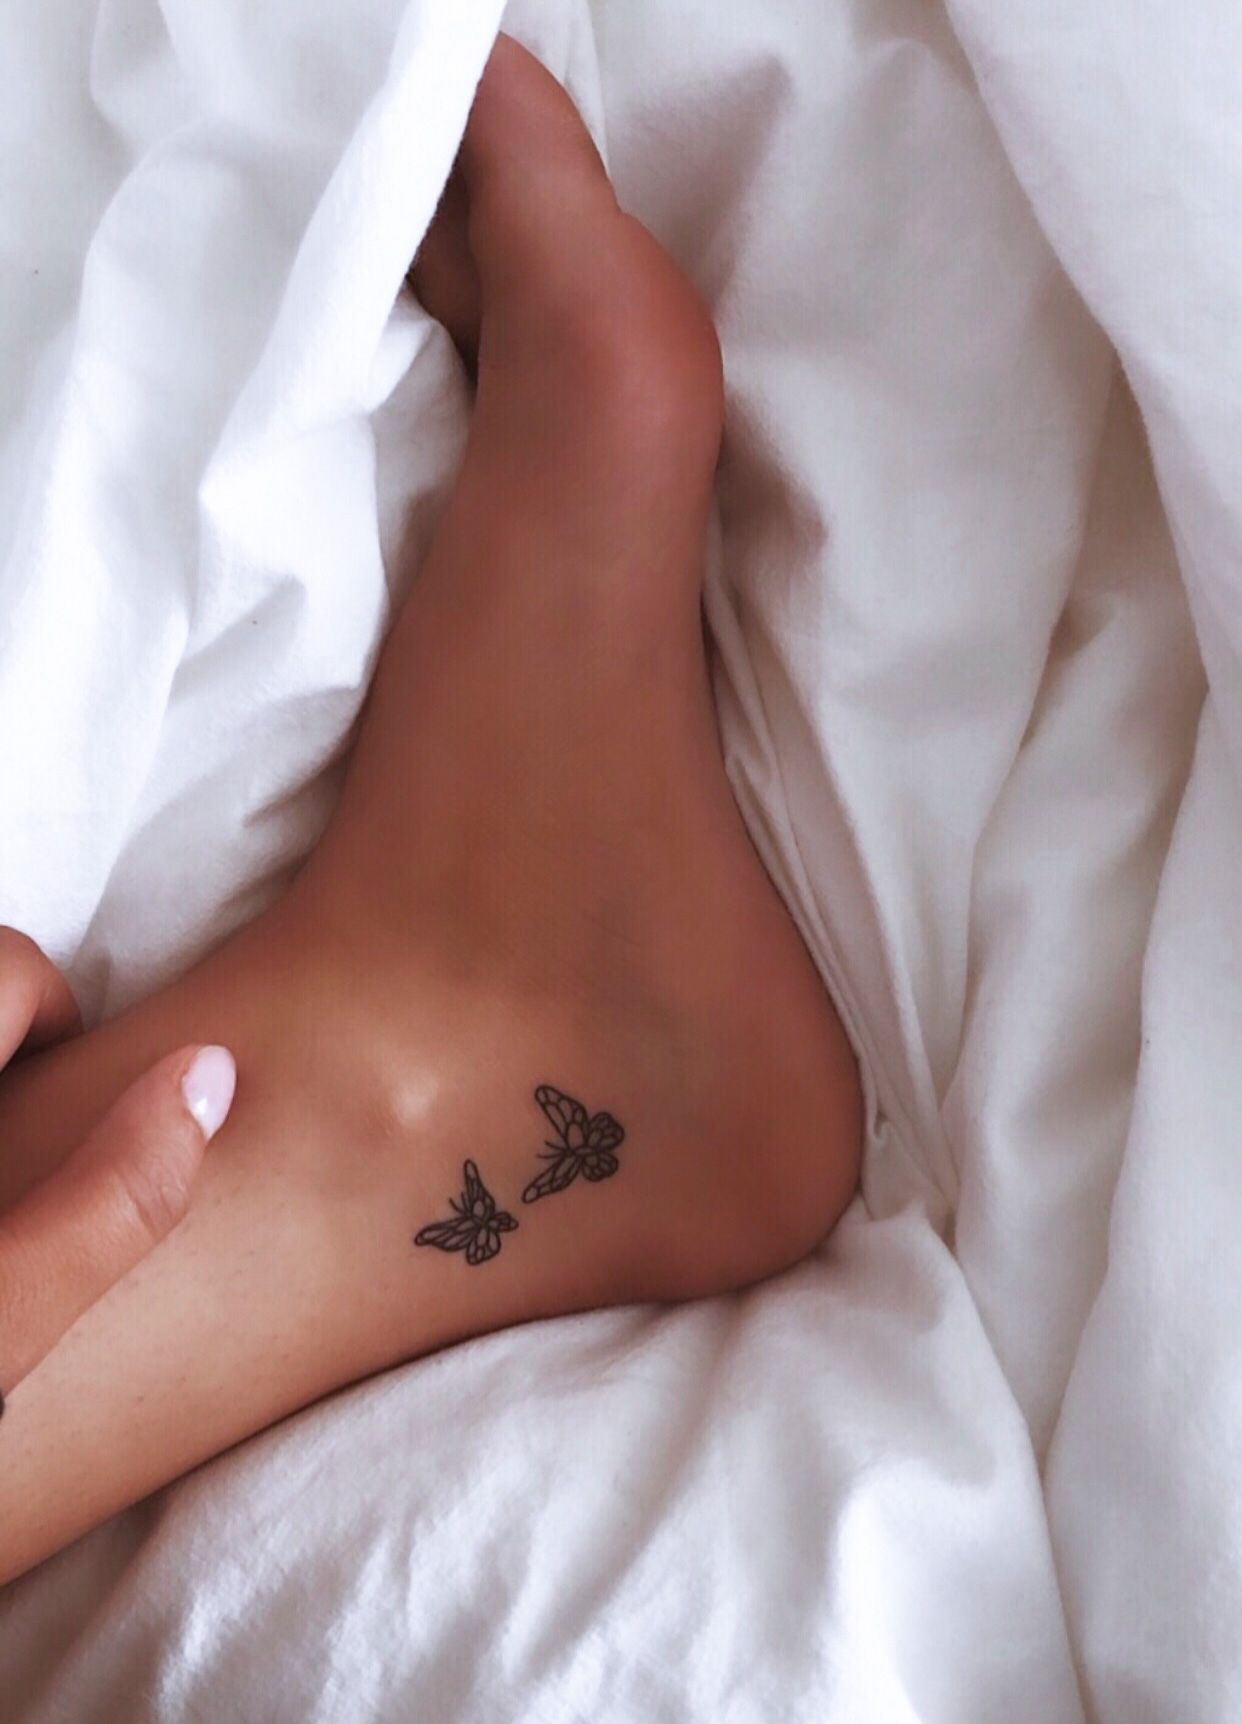 Awesome ankle tattoos for women